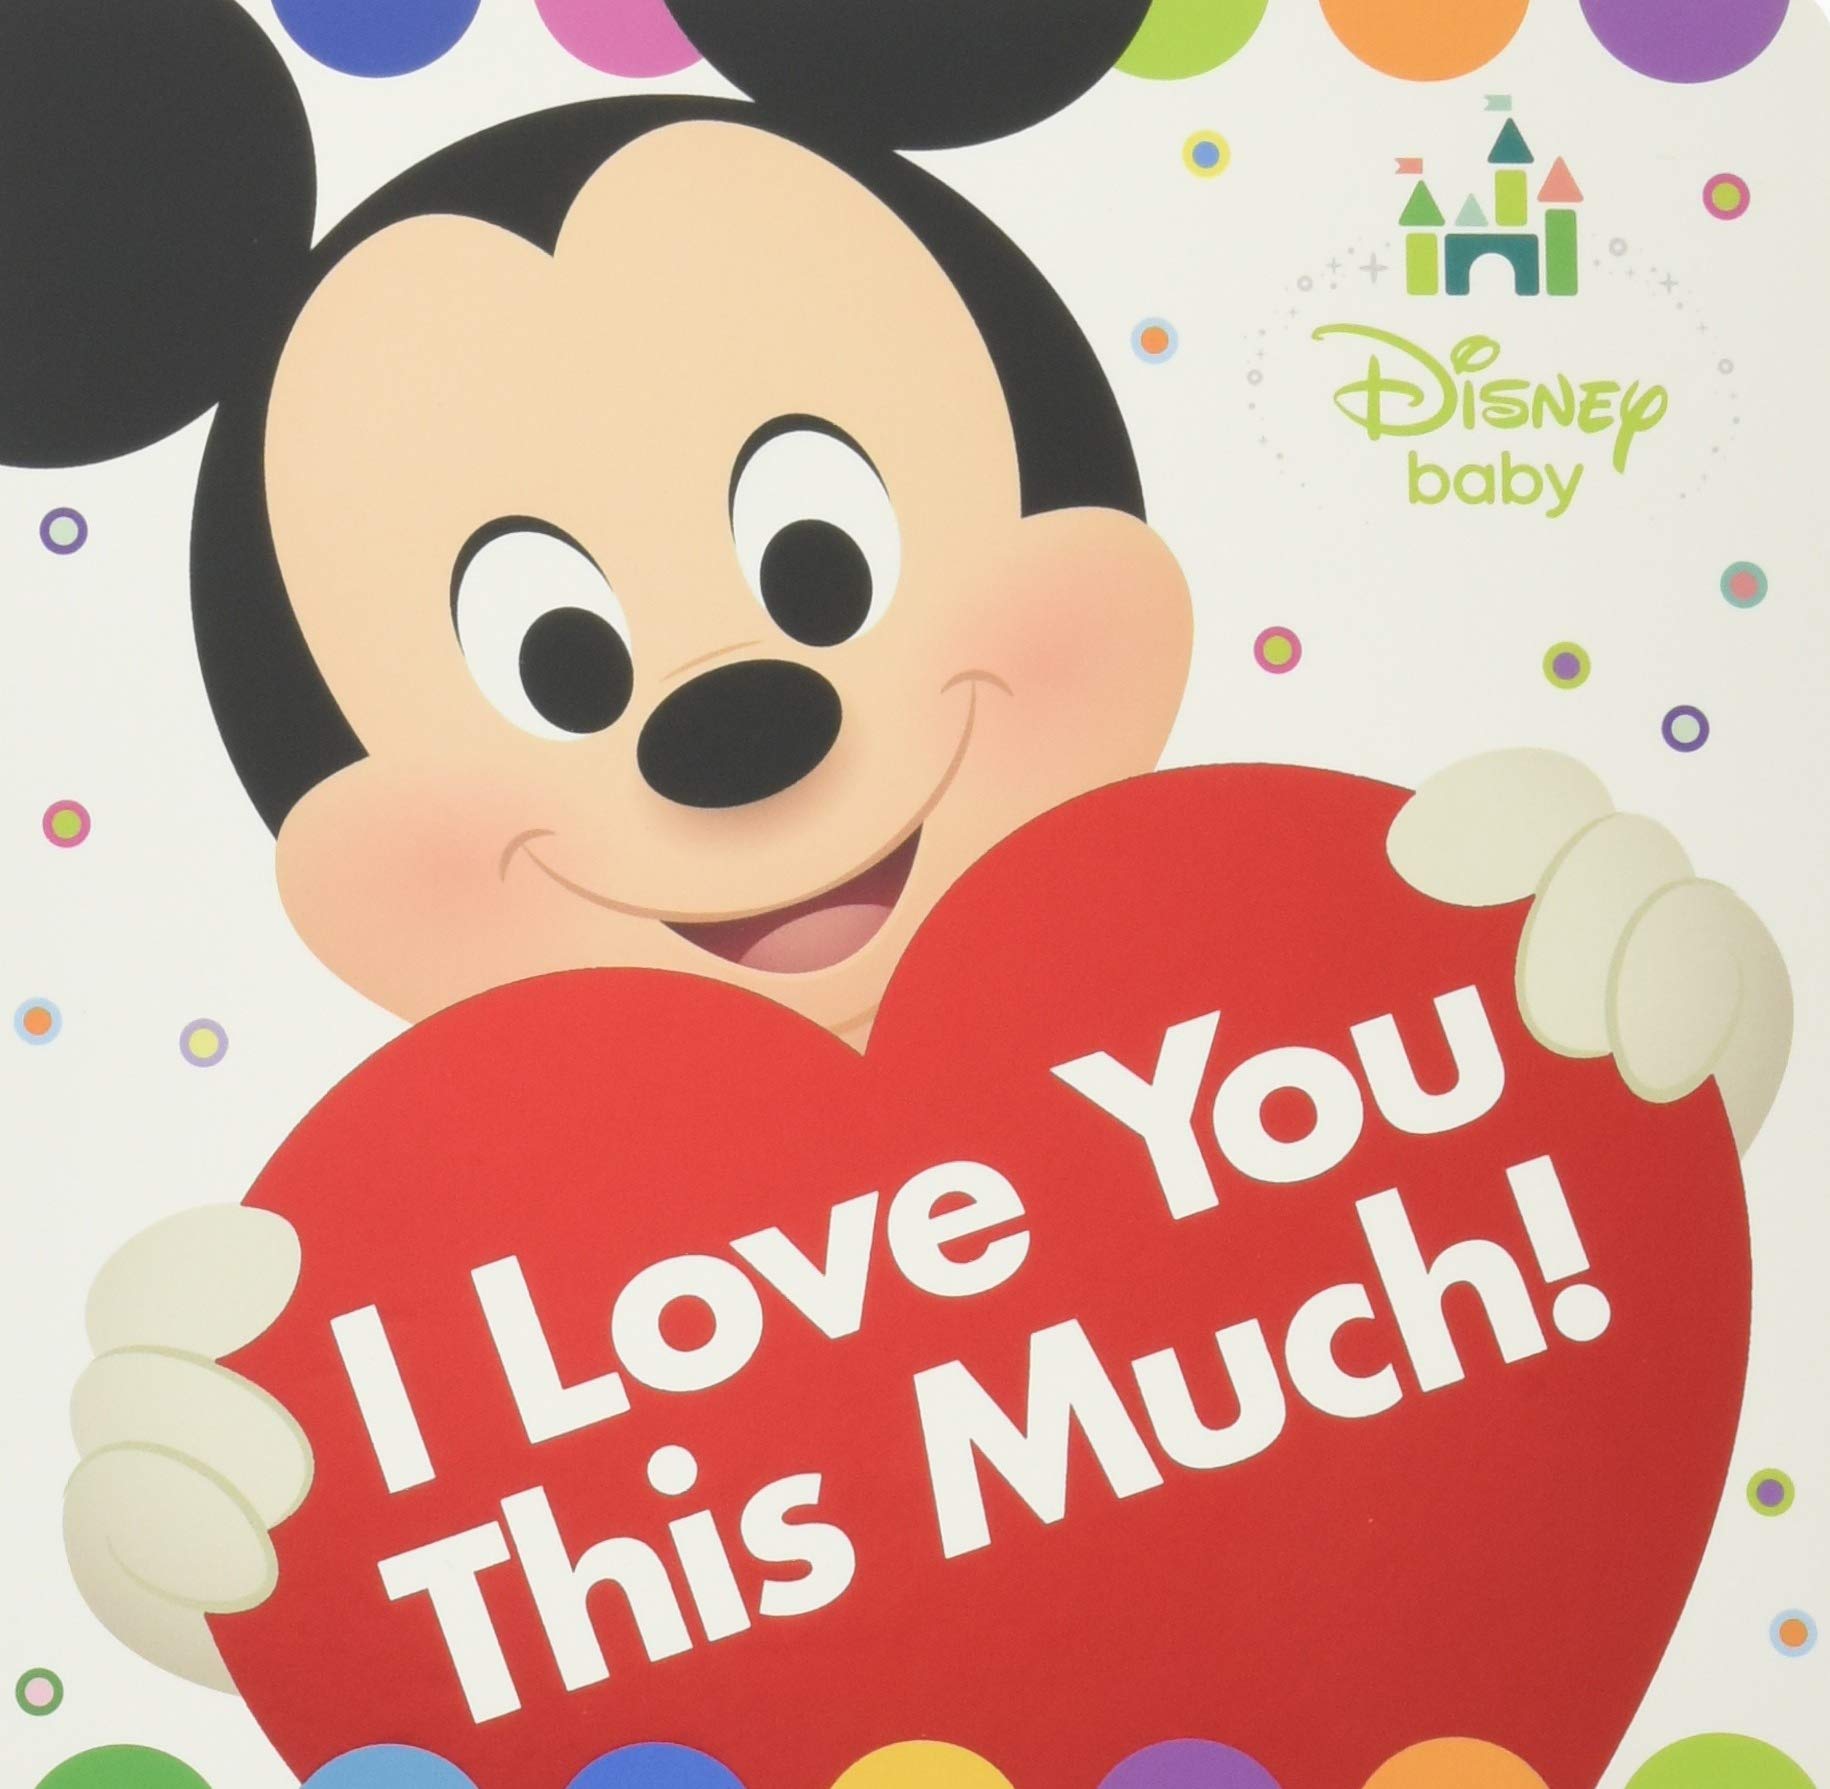 Disney Baby I Love You This Much!: Disney Book Group, Disney